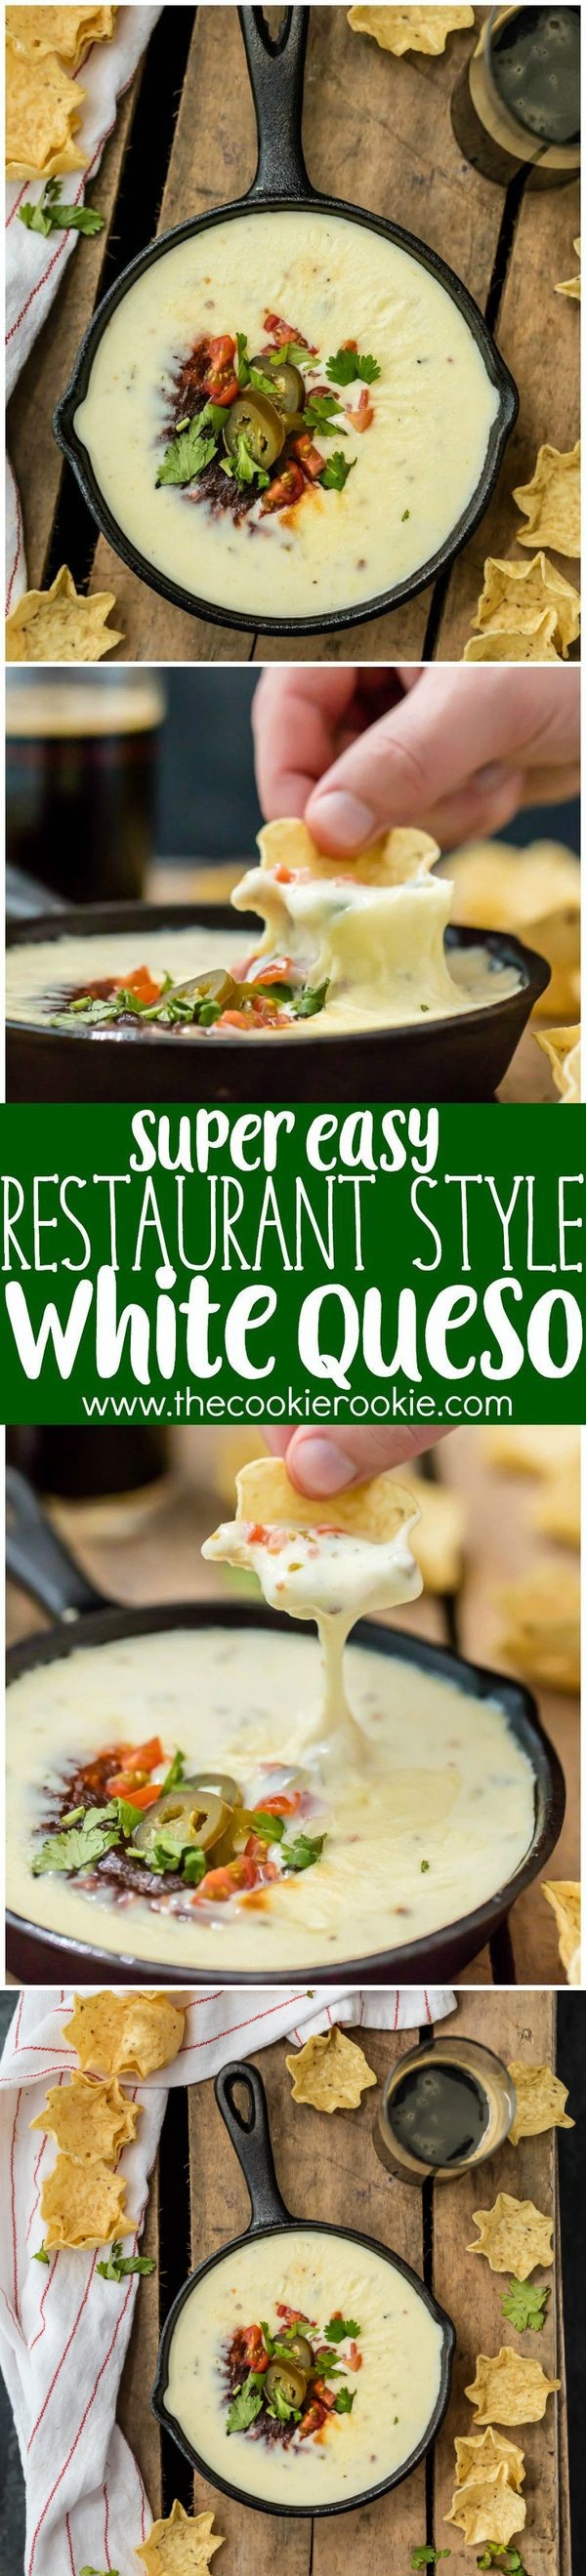 Easy Restaurant Style White Queso